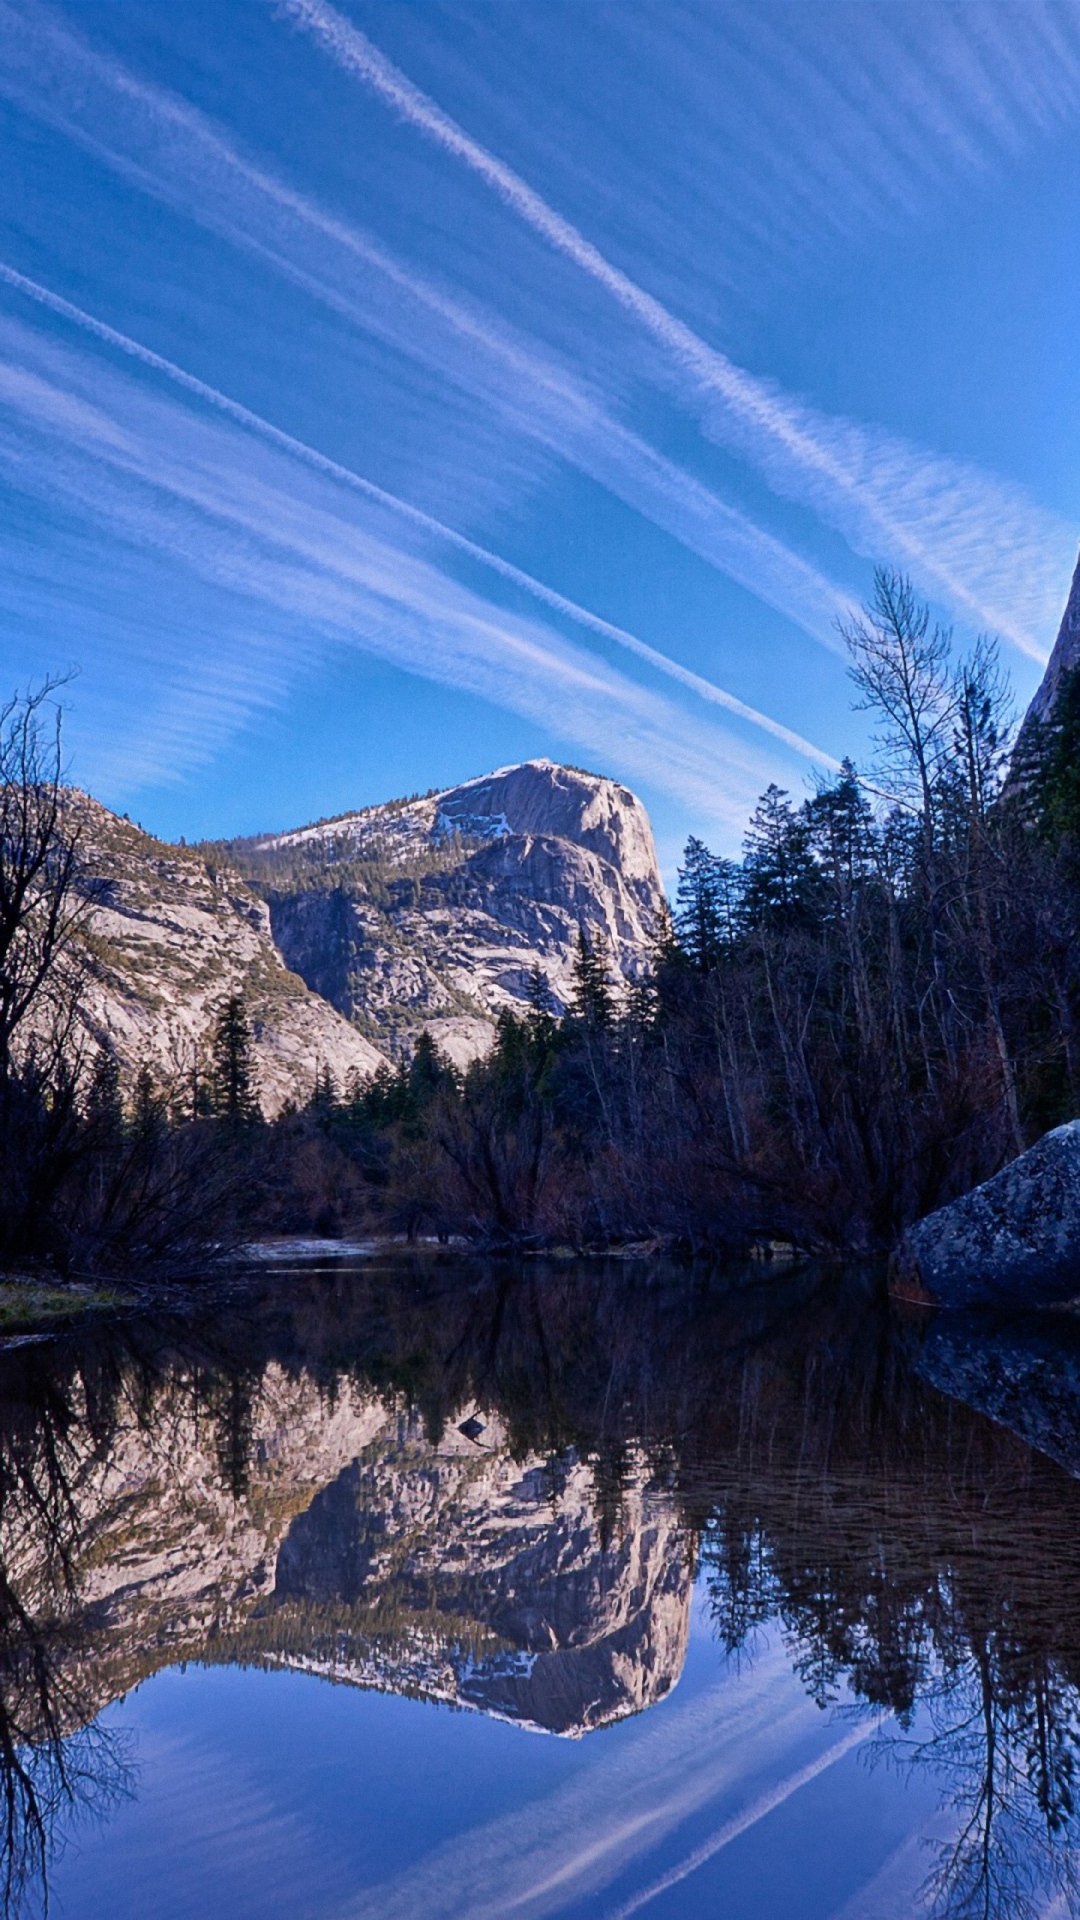 Hd Mountains Sky Nature Trees Galaxy S4 S5 Wallpapers - Yosemite National Park - HD Wallpaper 